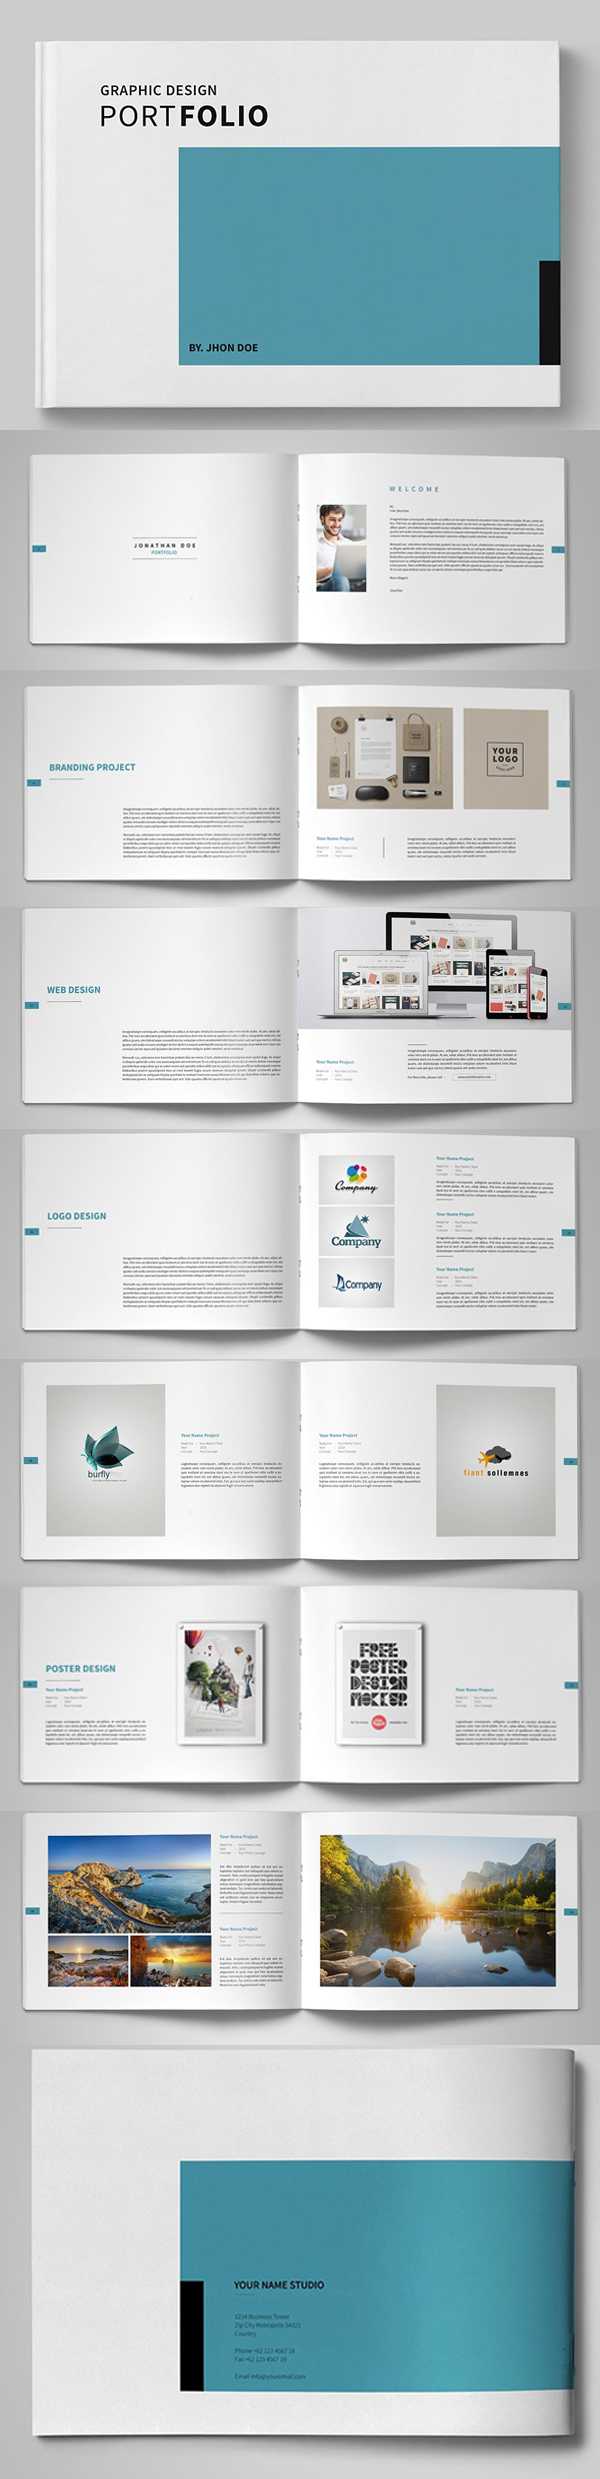 20 New Professional Catalog Brochure Templates | Design Intended For Indesign Templates Free Download Brochure